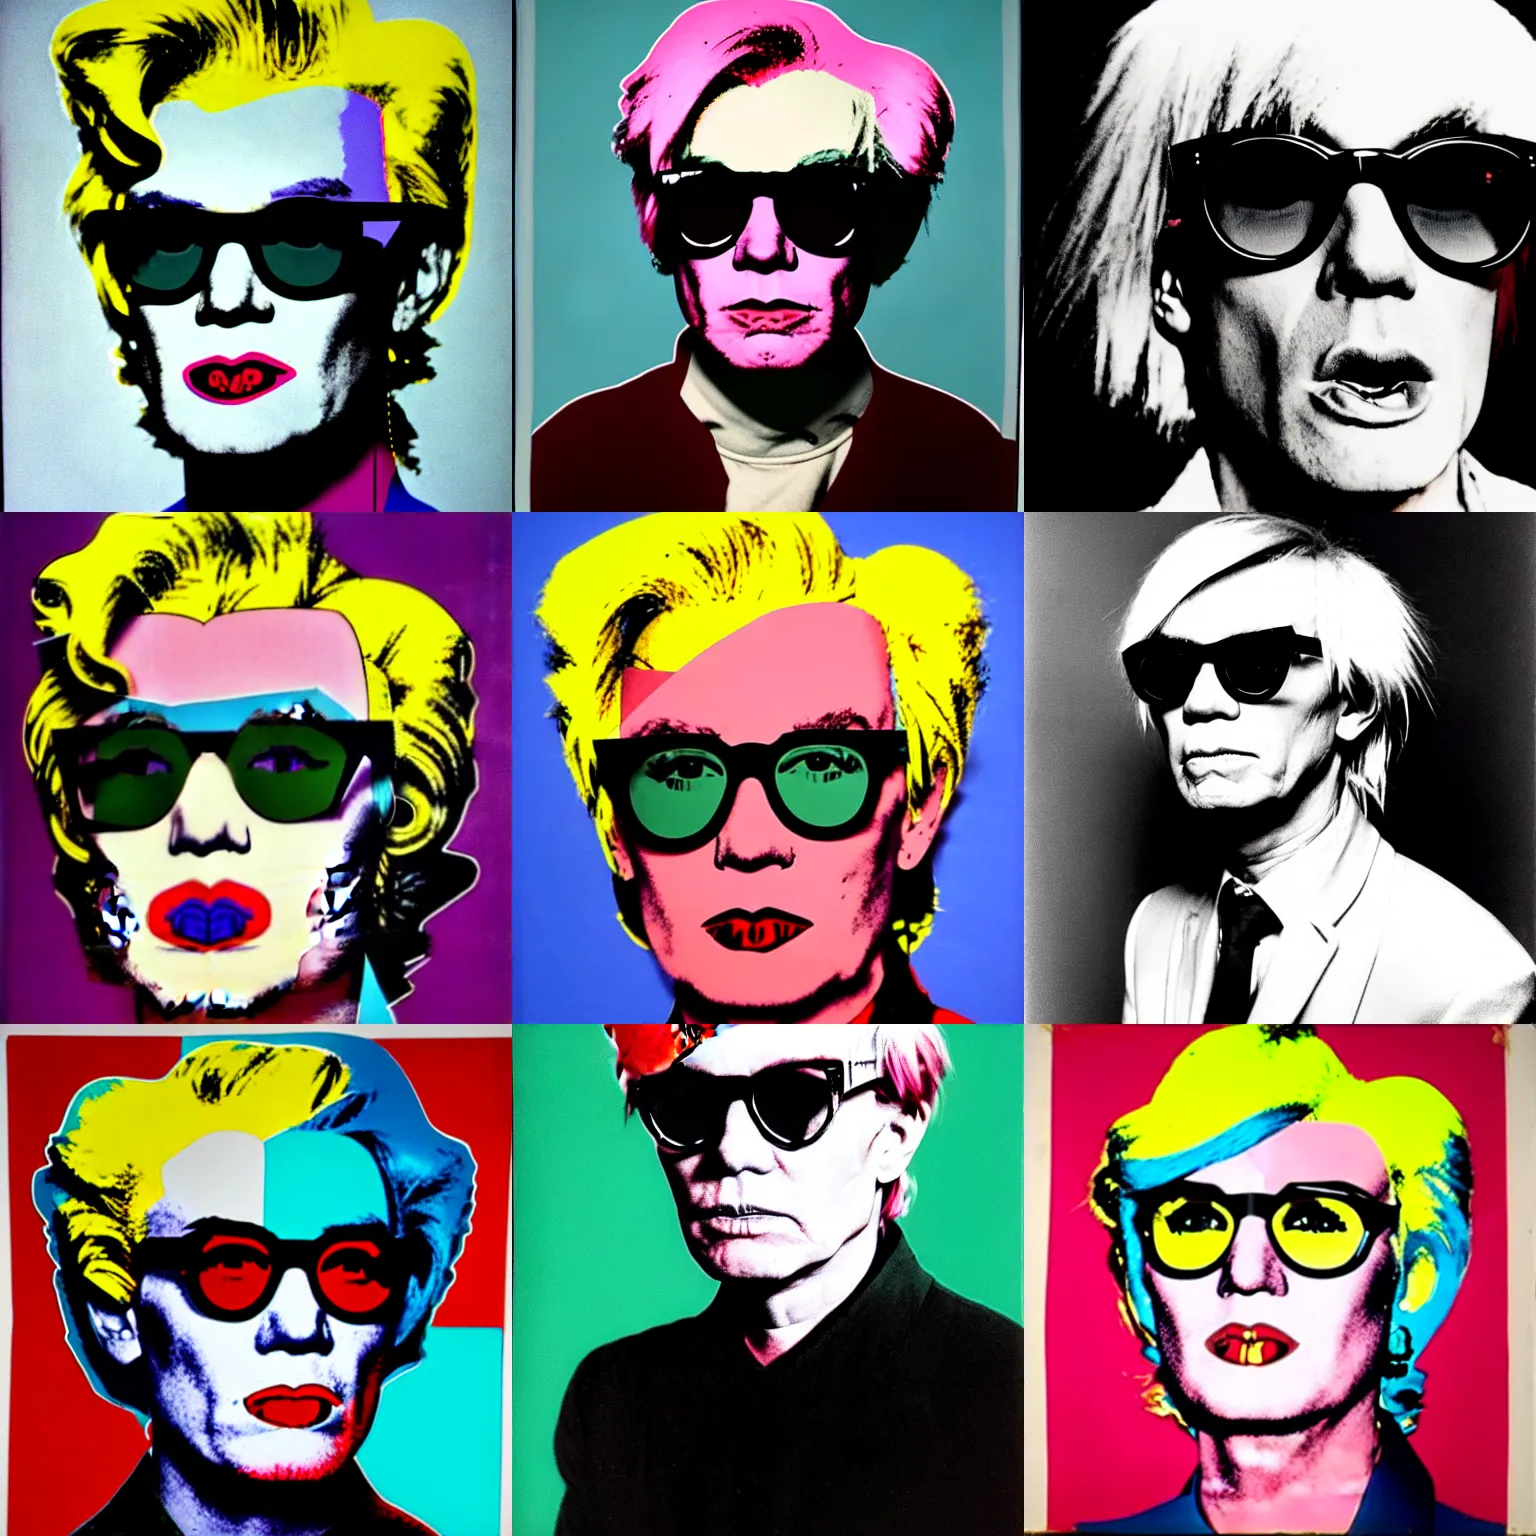 Prompt: colour portrait of absolutely angry andy warhol aged 40 looking sternly straight into the camera and wearing designer sun glasses, in the style of andy warhol